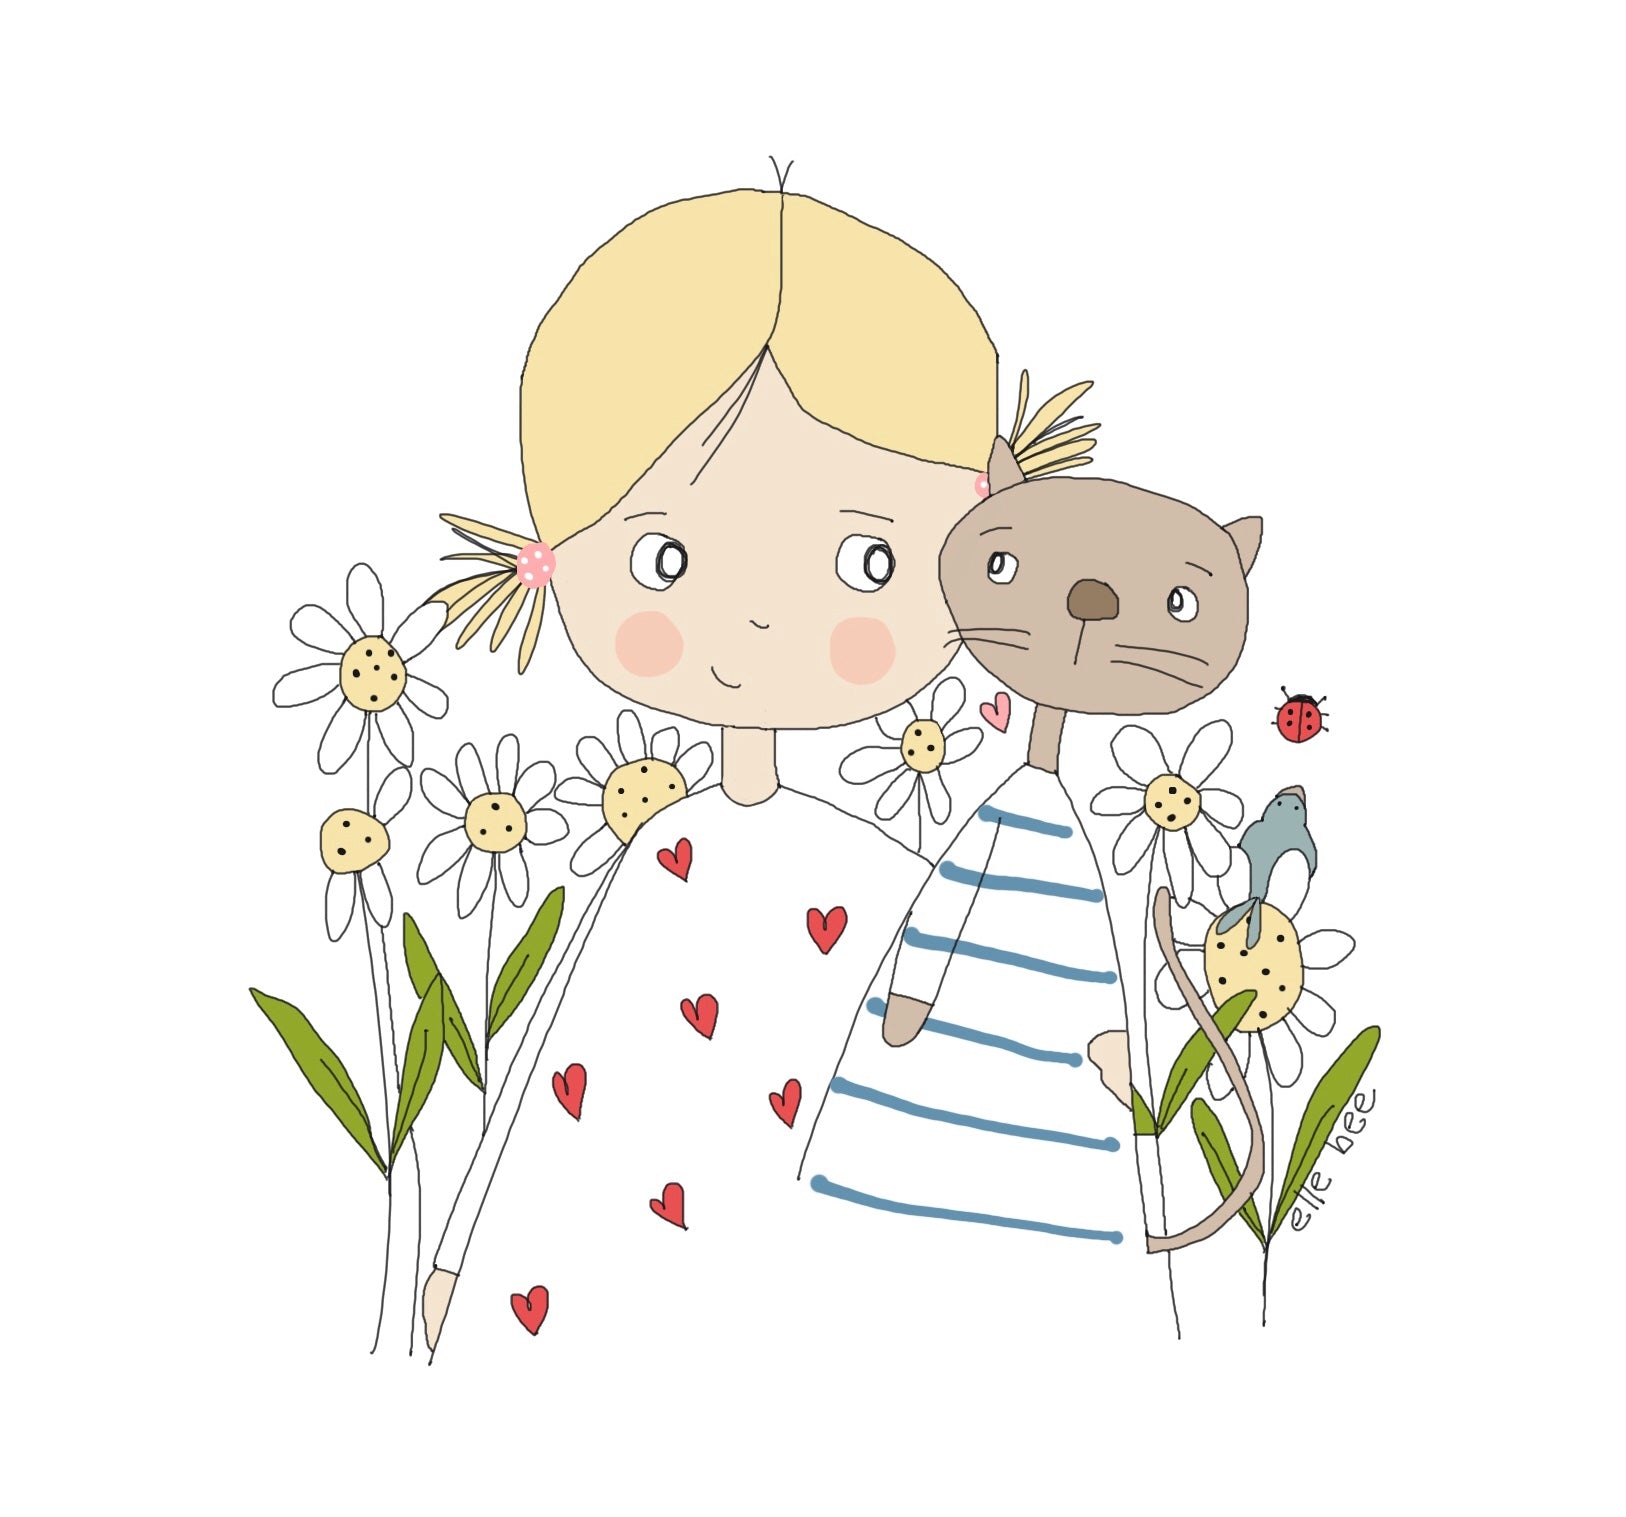 “Kitty and me in the Daisy Garden”  greeting card